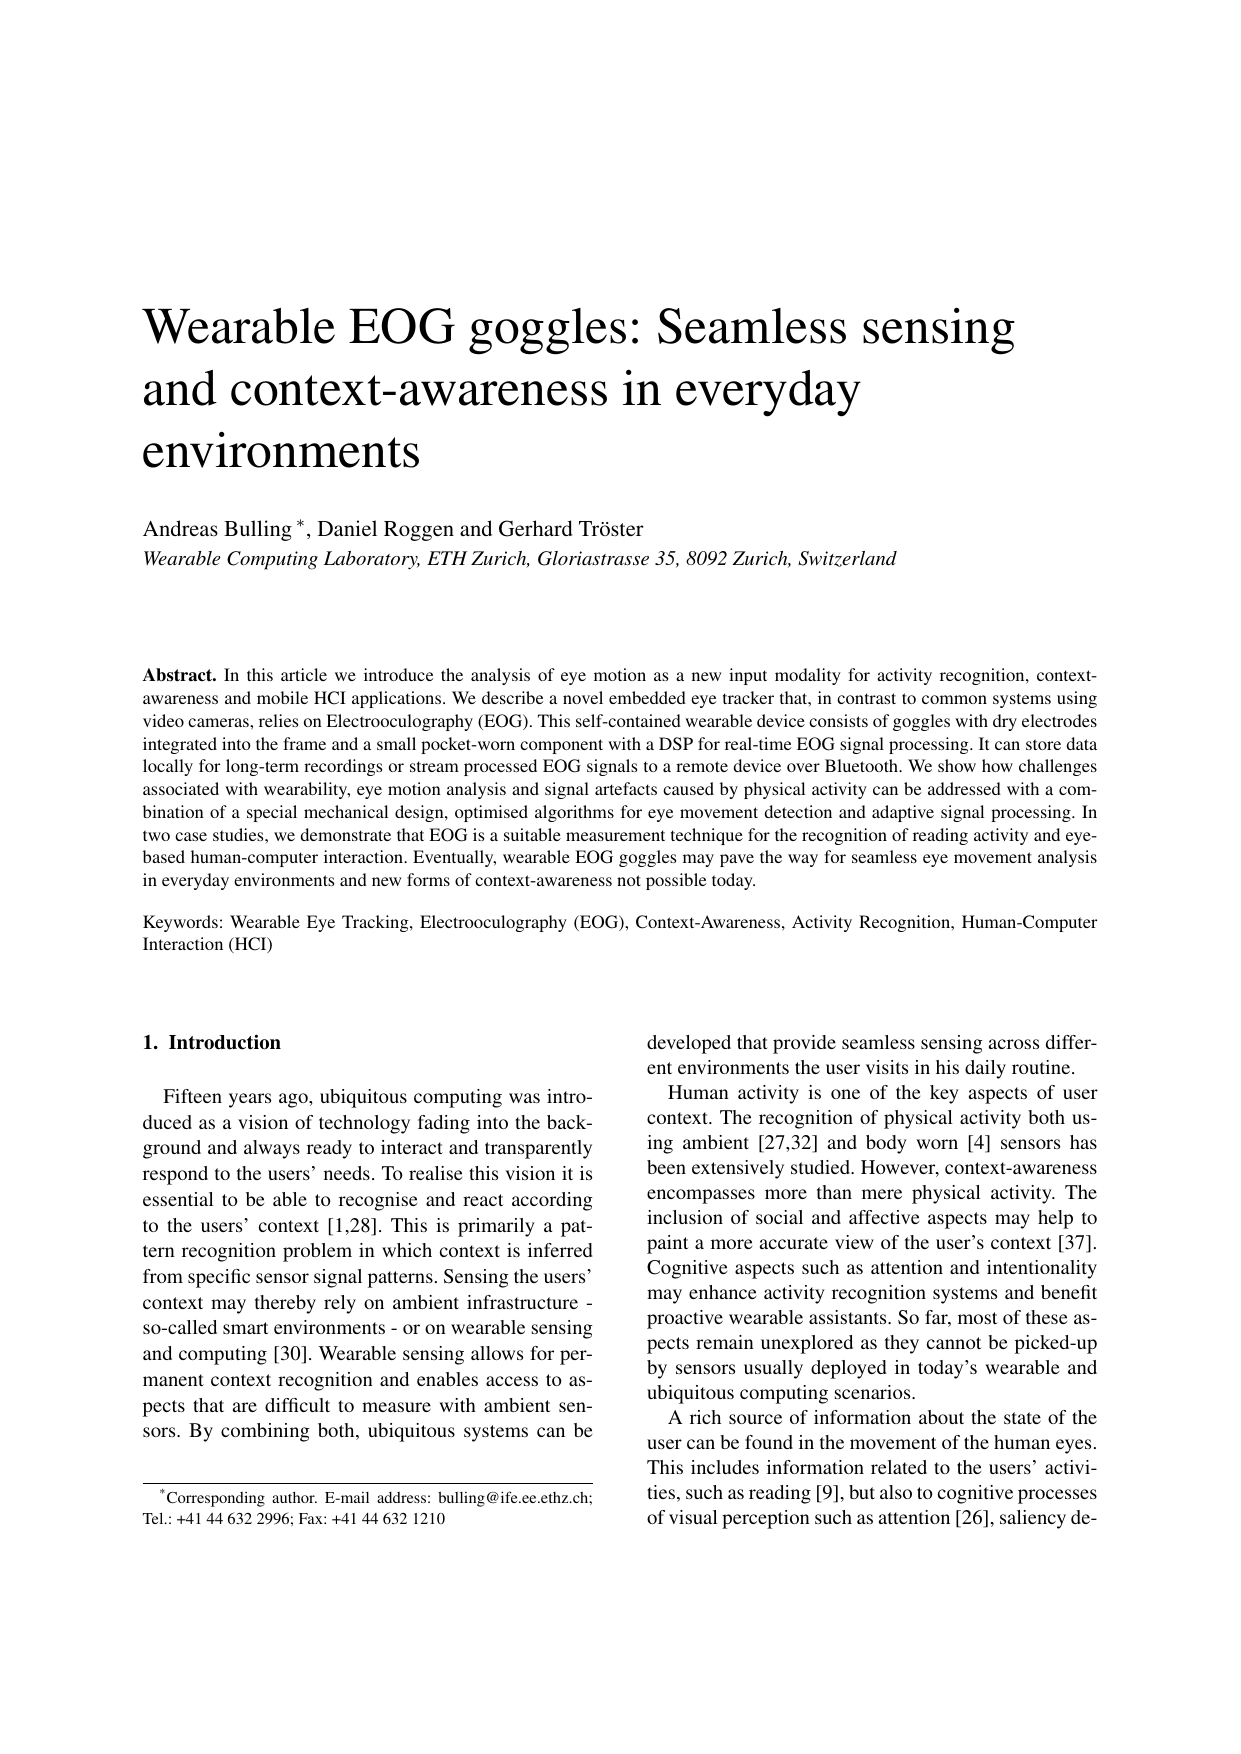 Wearable EOG goggles: Seamless sensing and context-awareness in everyday environments